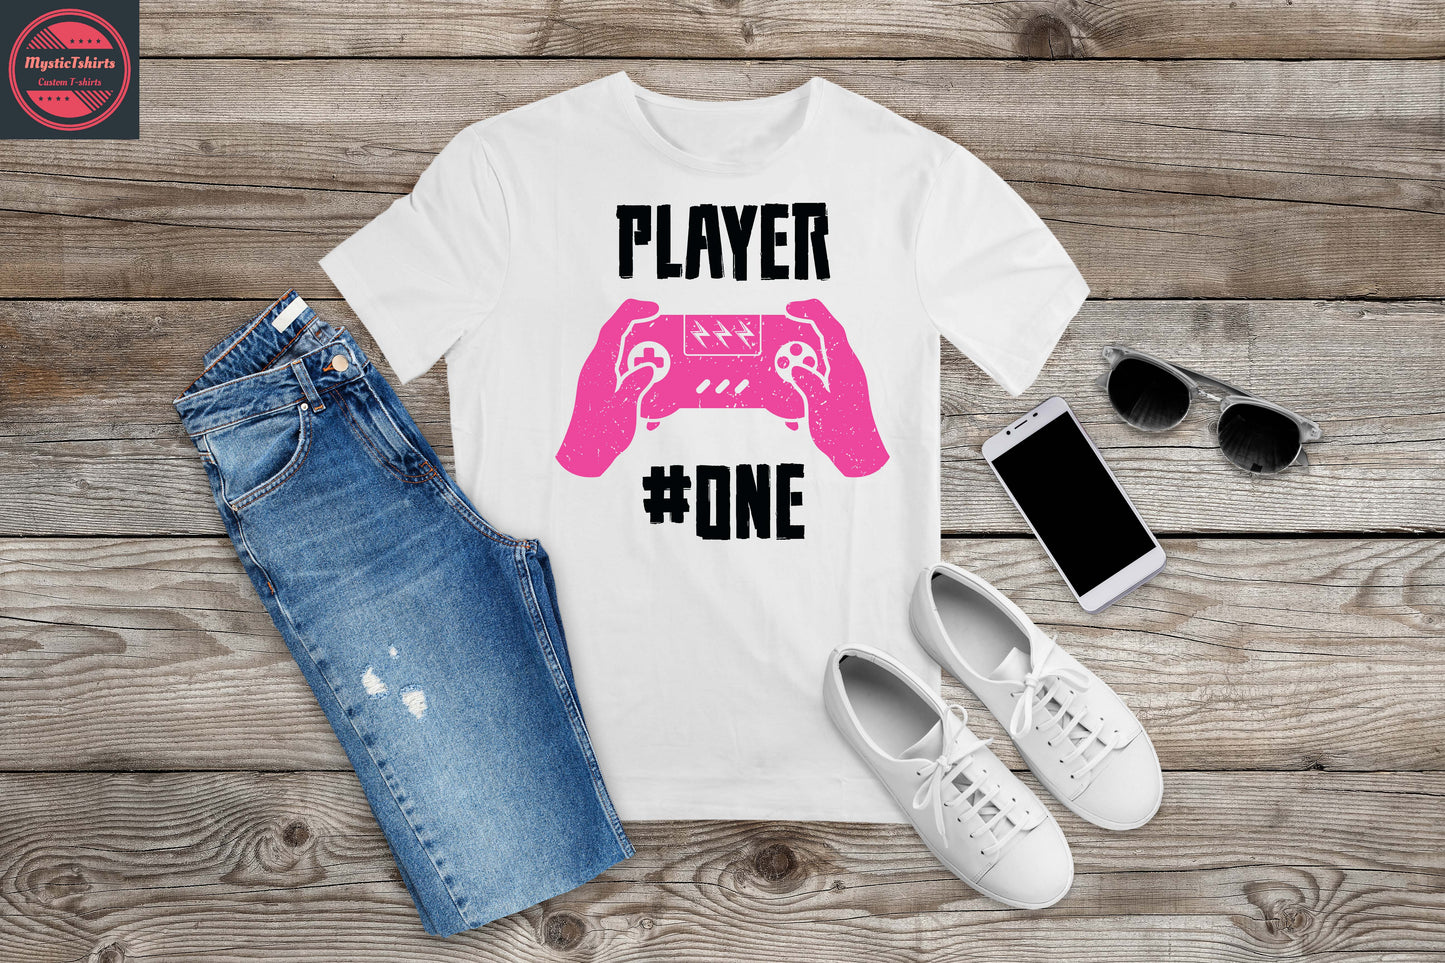 401. PLAYER #ONE, Custom Made Shirt, Personalized T-Shirt, Custom Text, Make Your Own Shirt, Custom Tee